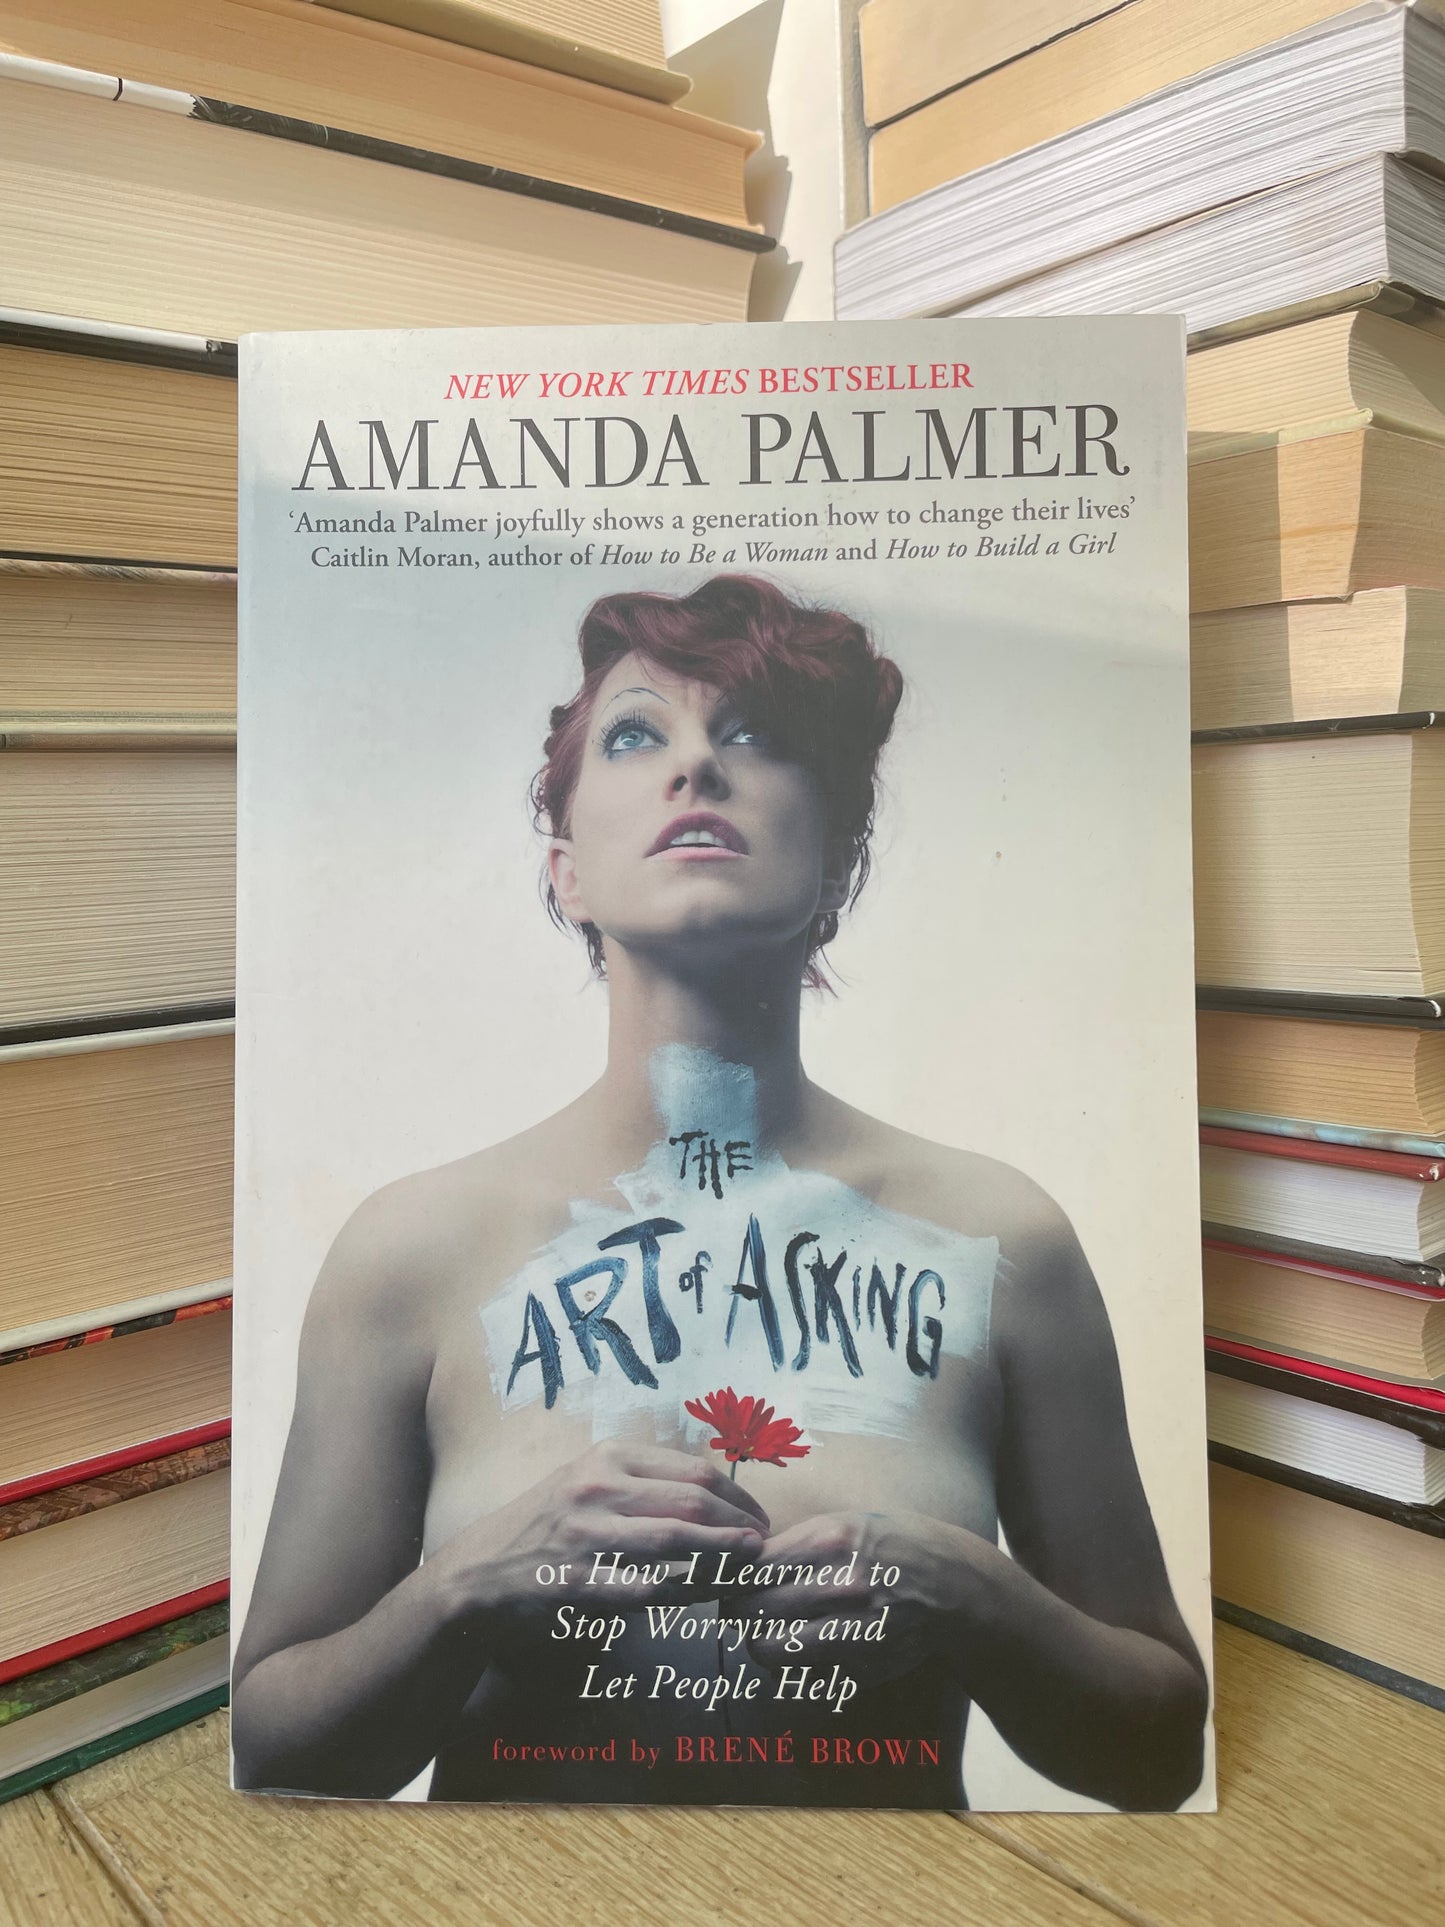 Amanda Palmer - The Art of Asking or How I Learned to Stop Worrying and Let People Help